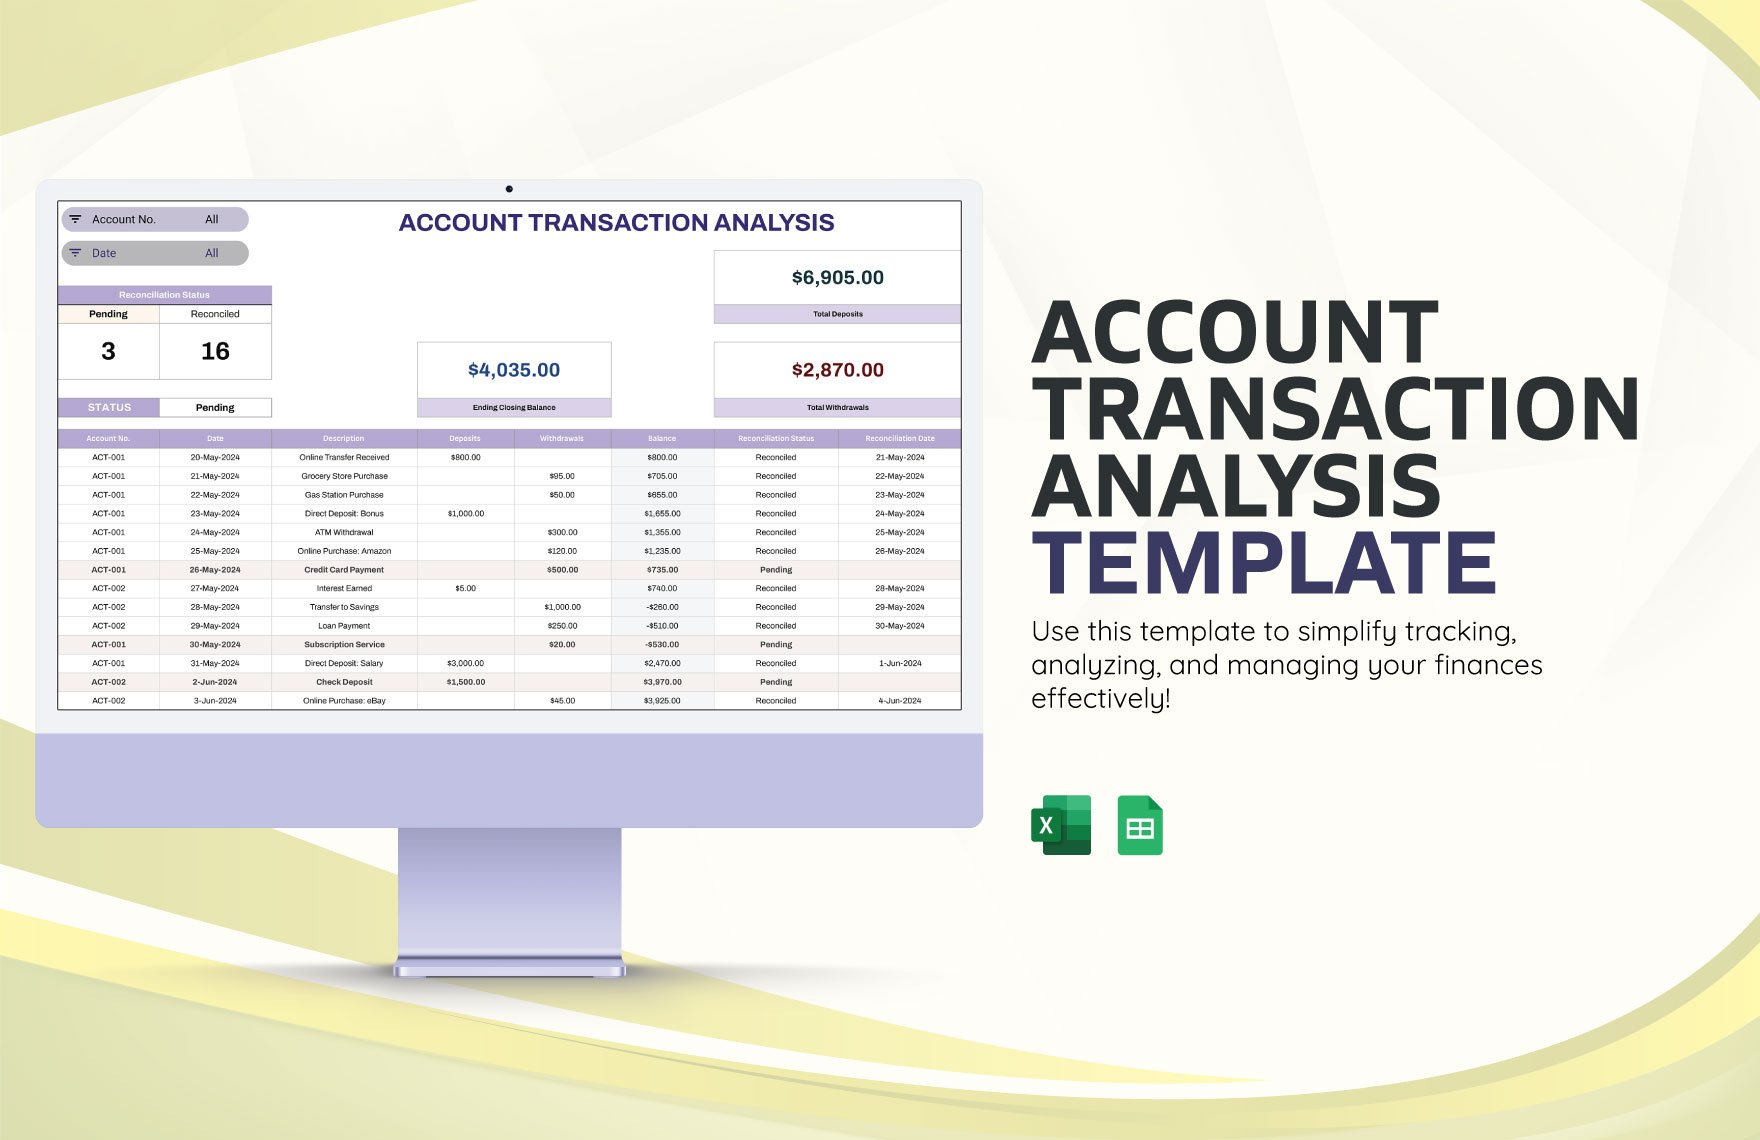 Account Transaction Analysis Template in Word, Google Sheets